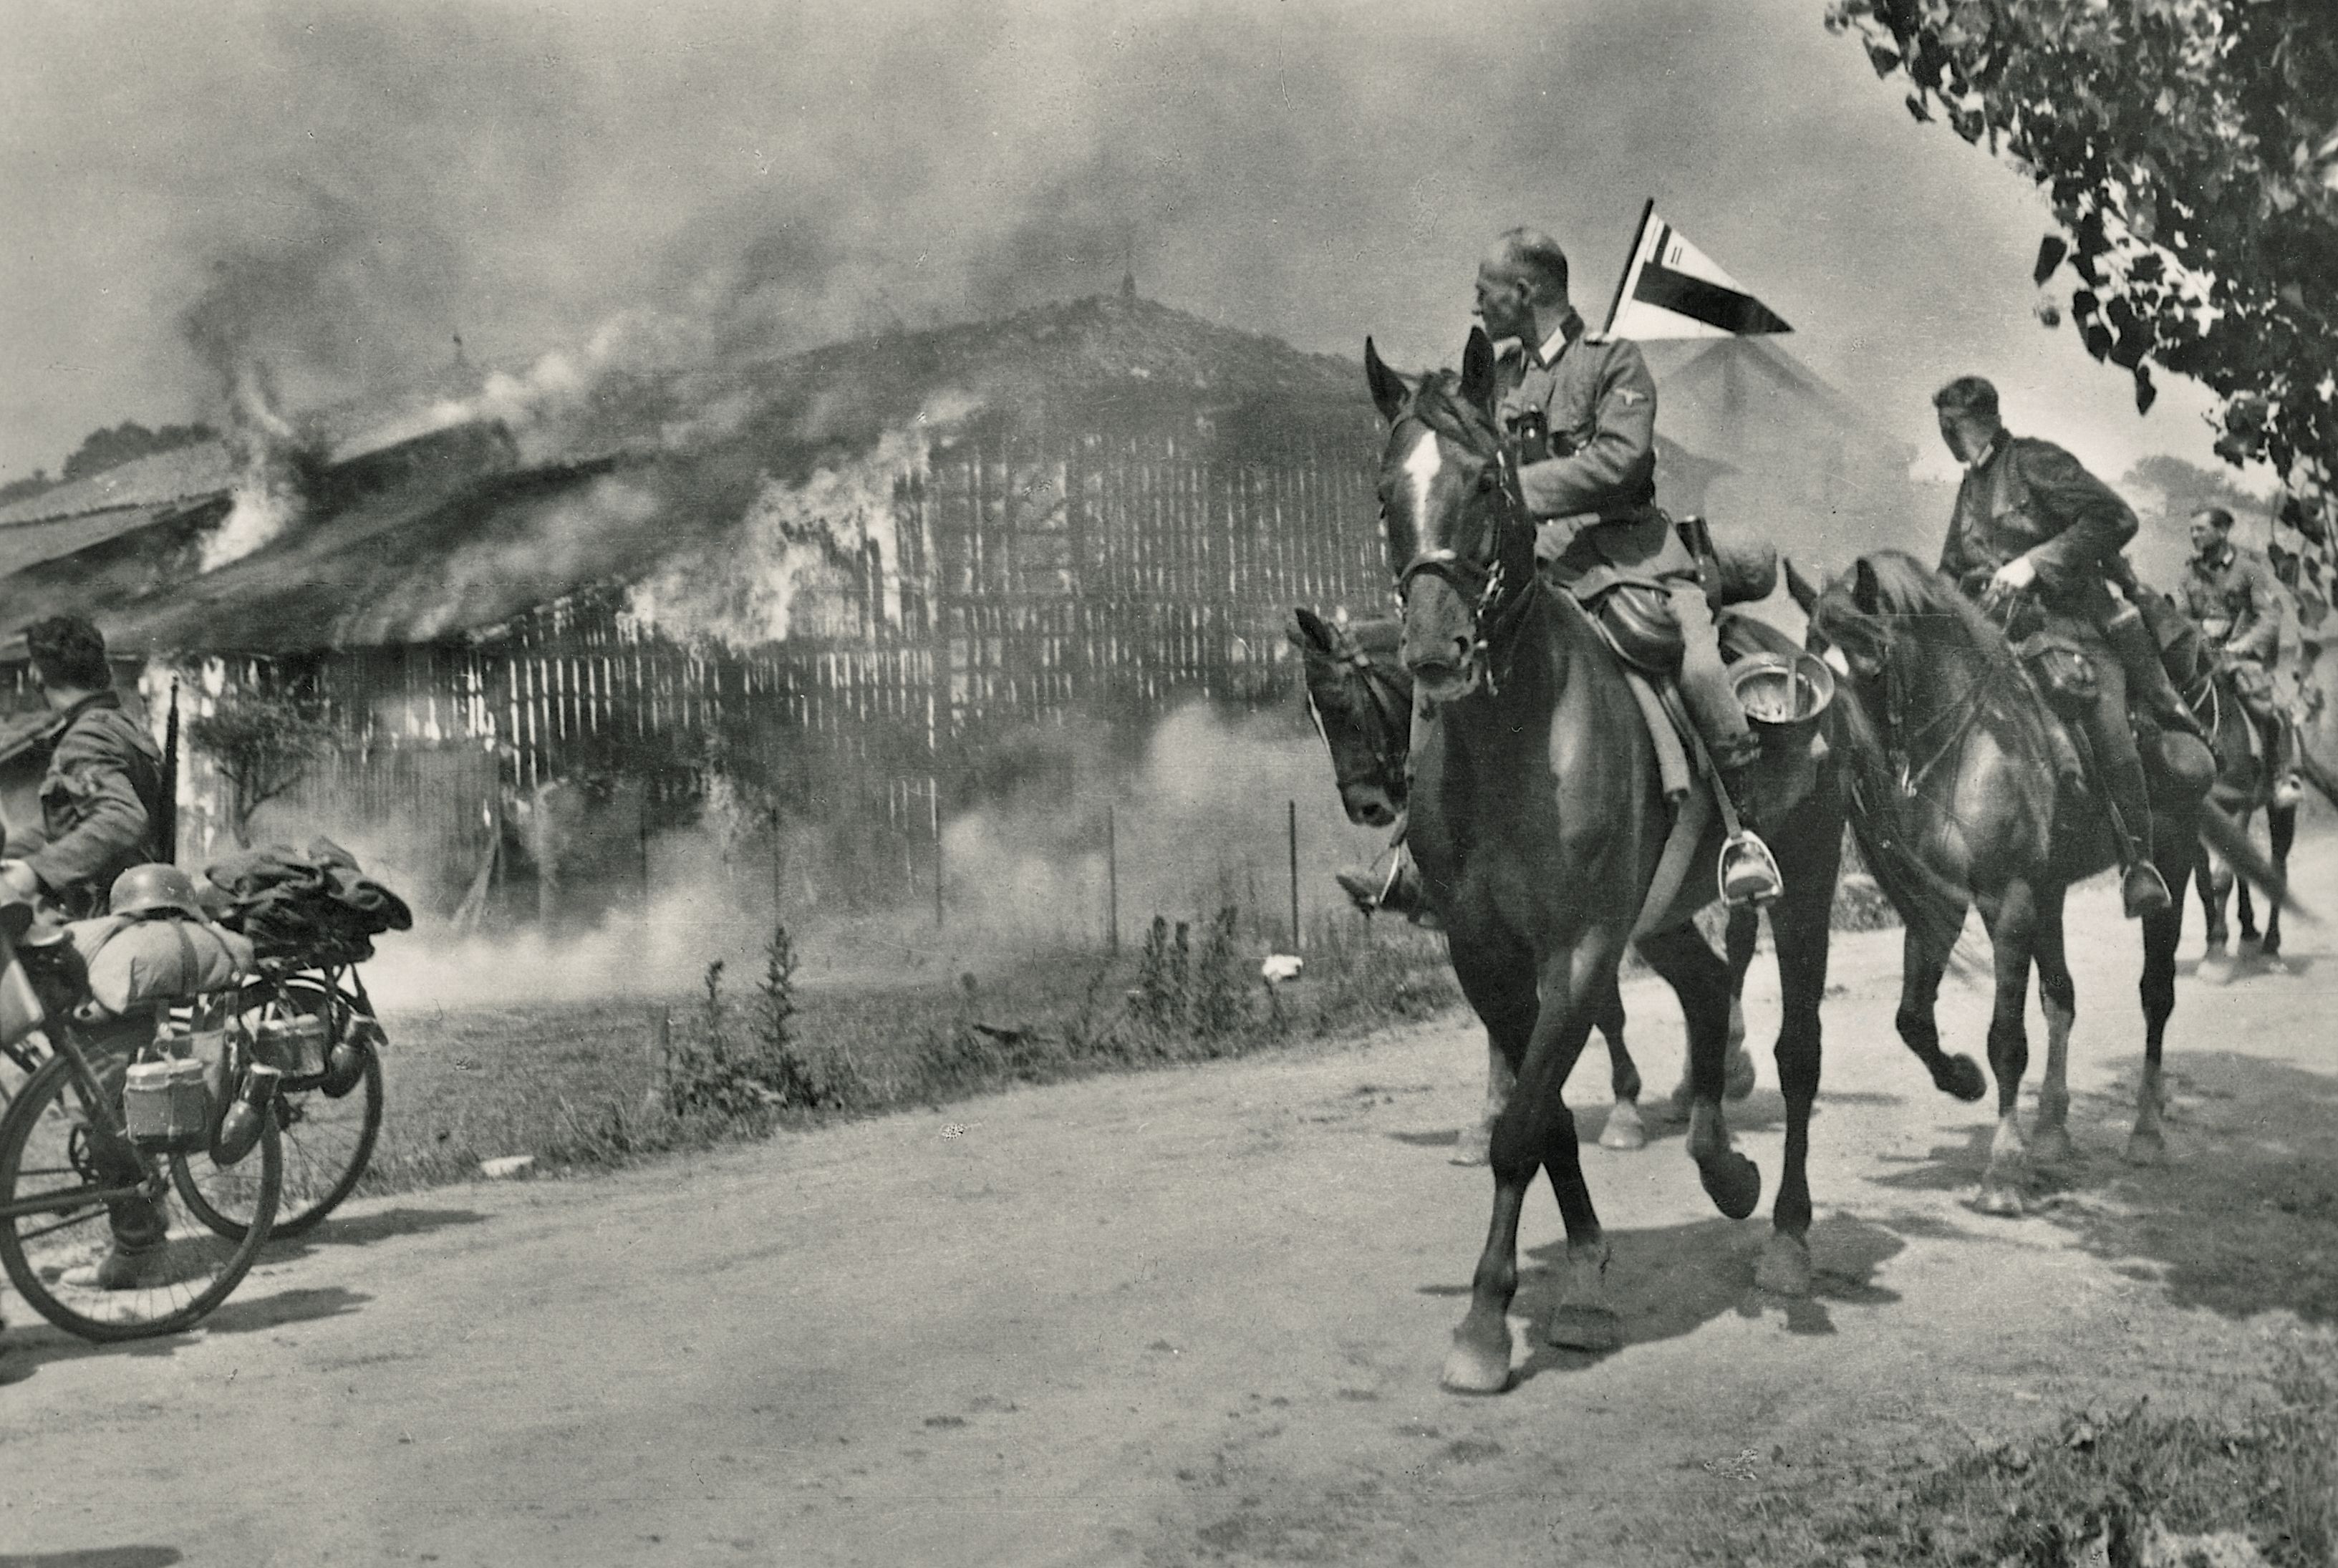 German SS and police troops in Russia ride past a burning structure as they pillage captured territory. Nazi Germany made it official policy to starve Russians, kill them on sight or exterminate them through forced labor. Devyatayev, 27, was made a slave laborer after being captured. / Museum of Danish Resistance Archive